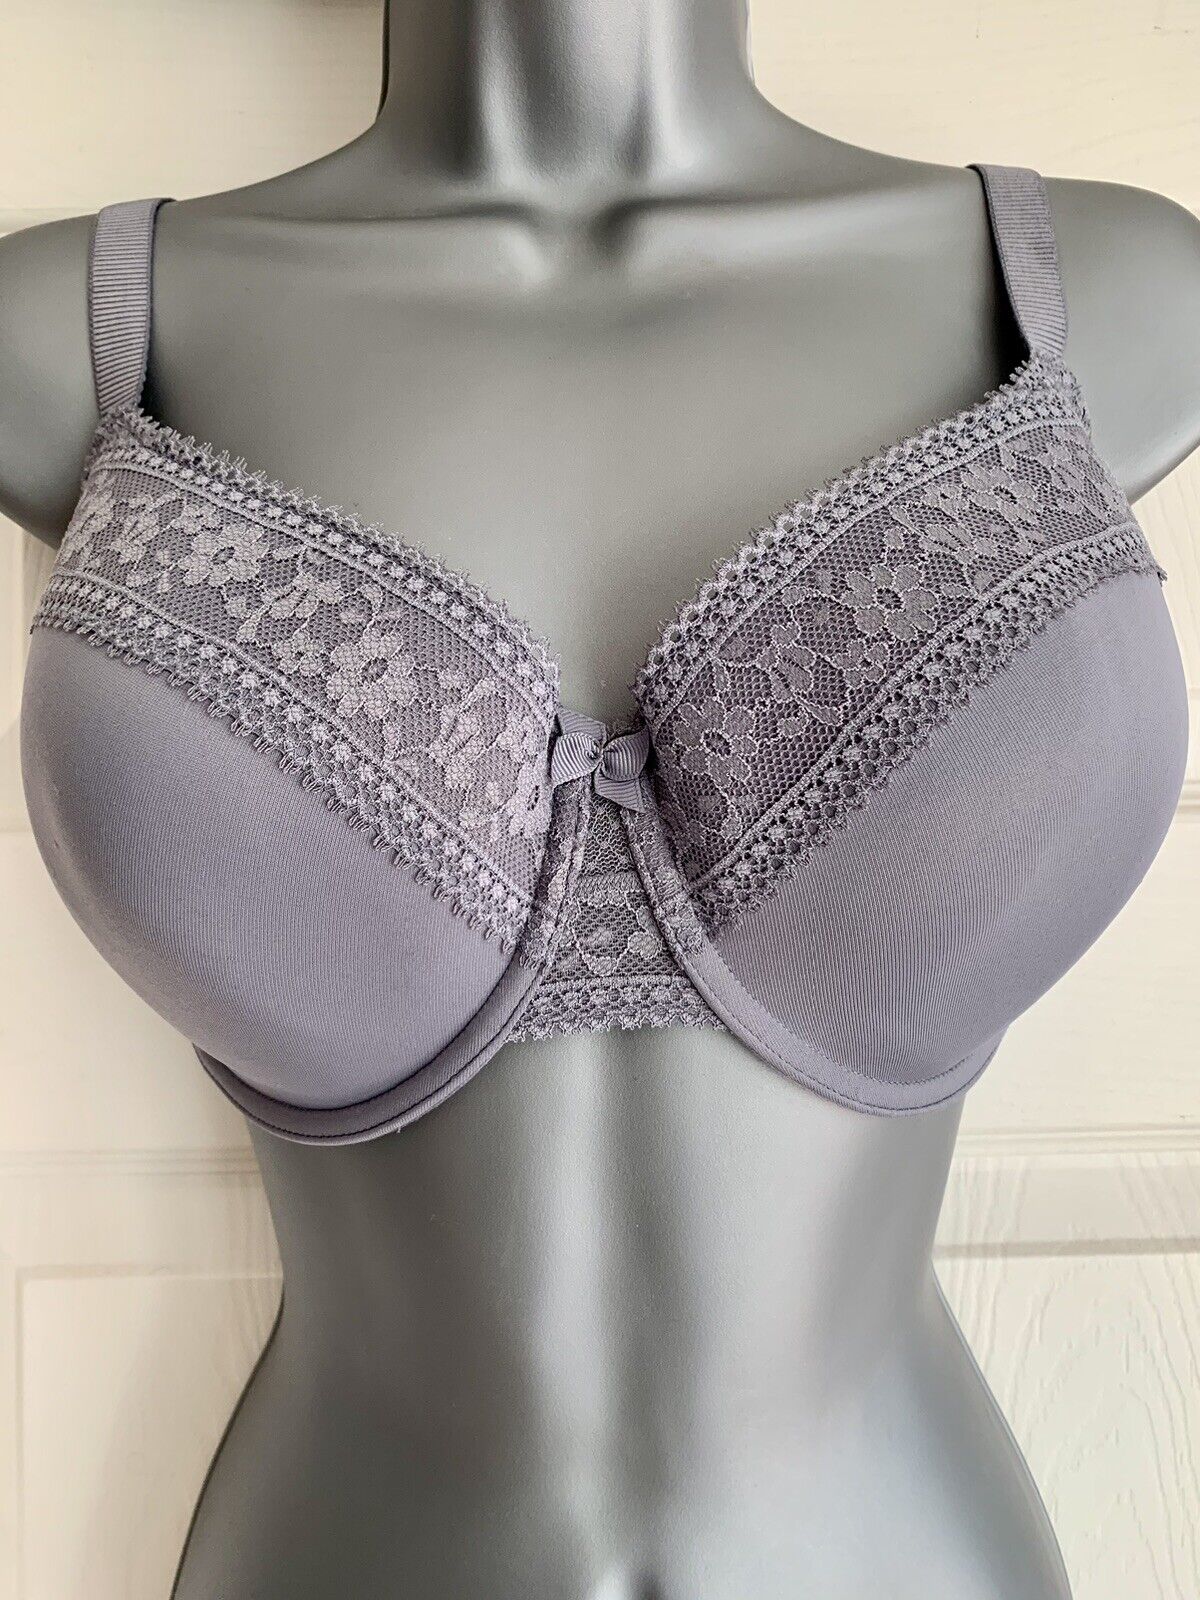 EX M*S Smoke Lace Trimmed Underwired  Padded T-Shirt Bra 30G, 32G, 34F, 34GG